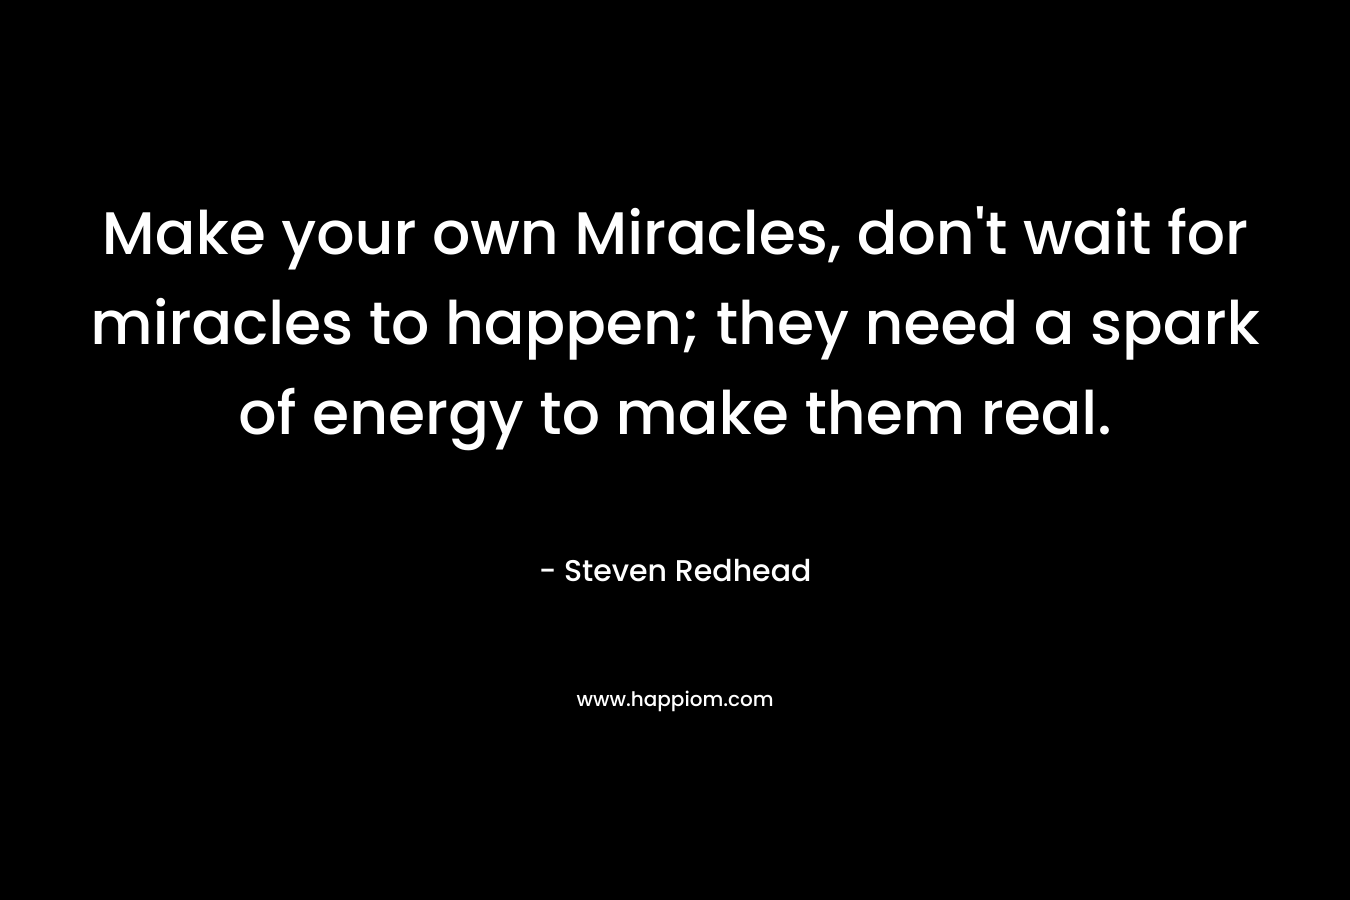 Make your own Miracles, don’t wait for miracles to happen; they need a spark of energy to make them real. – Steven Redhead